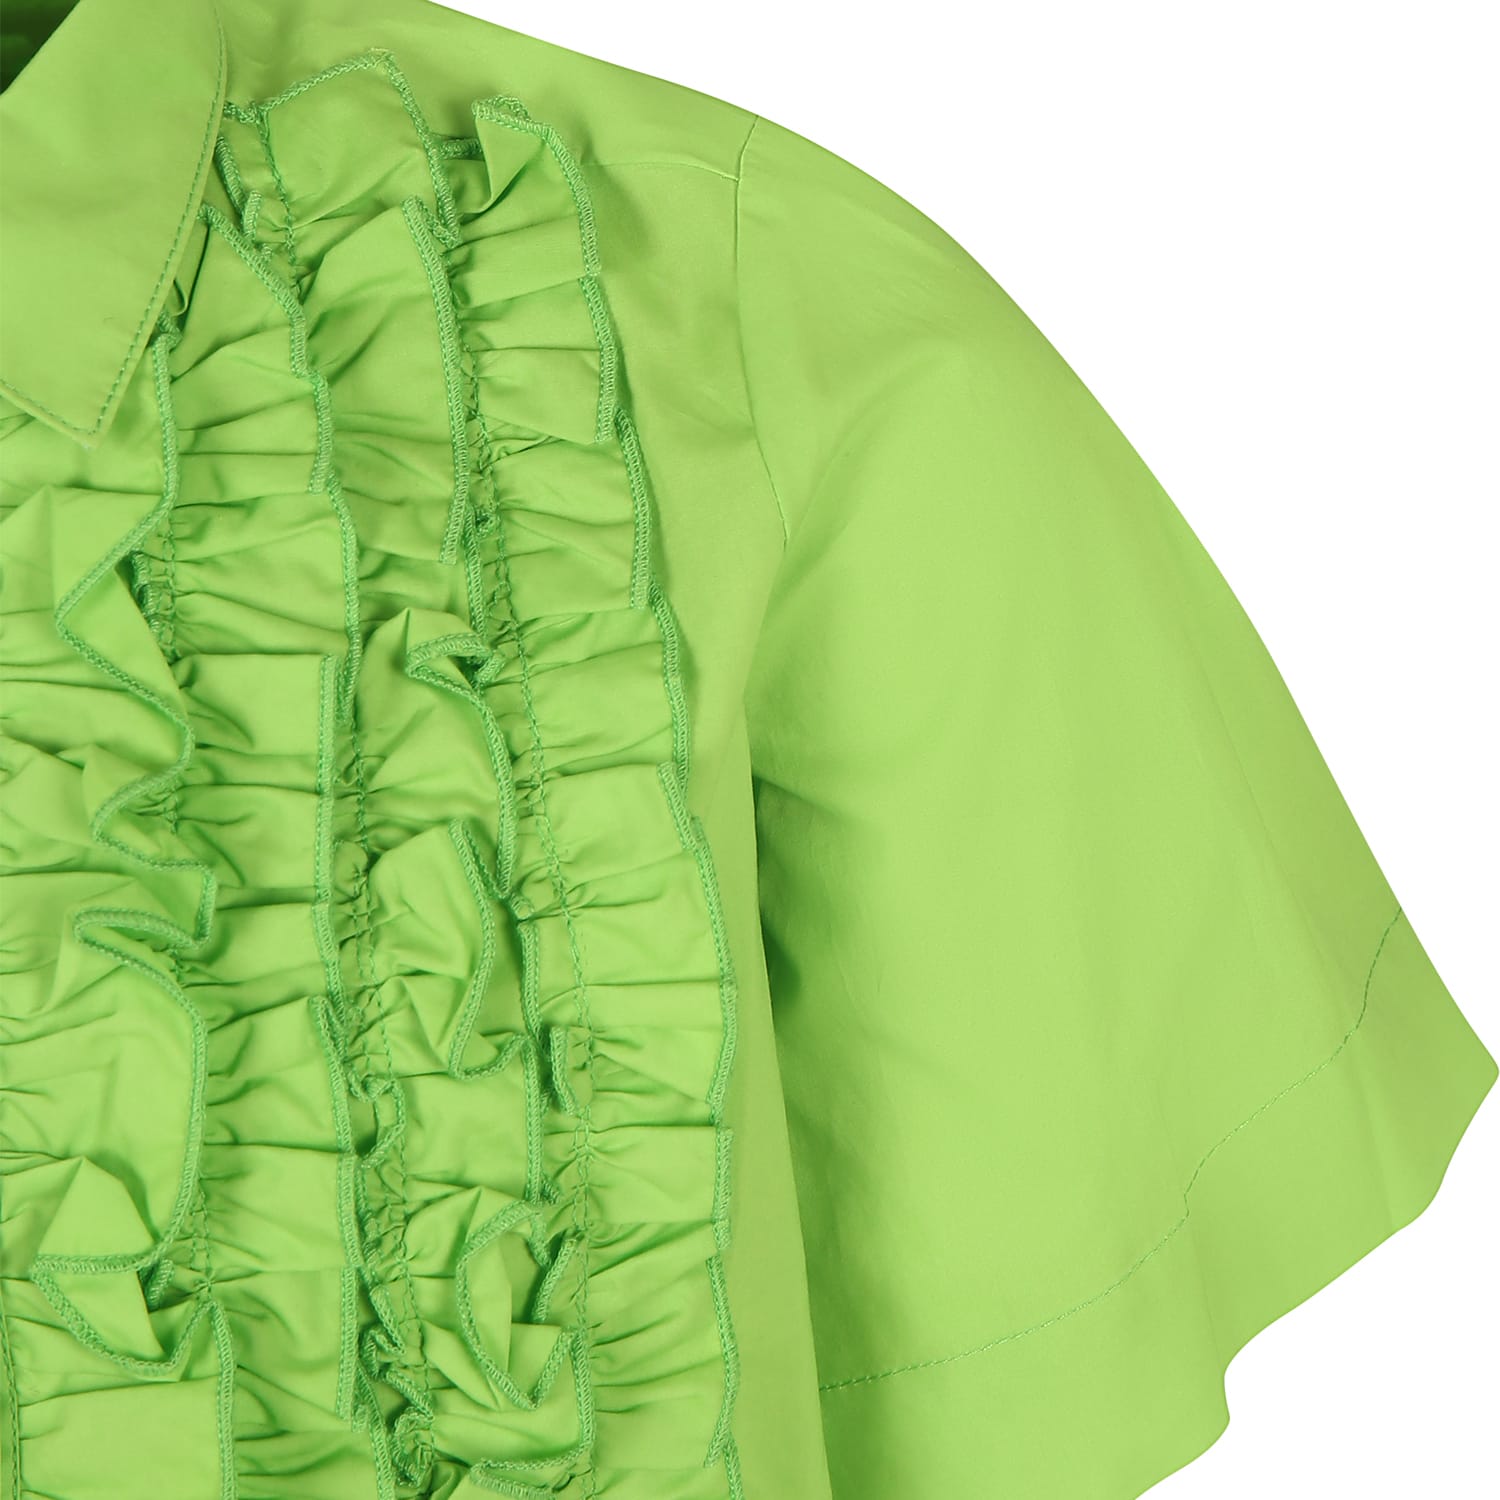 Shop Msgm Green Shirt For Girl With Logo